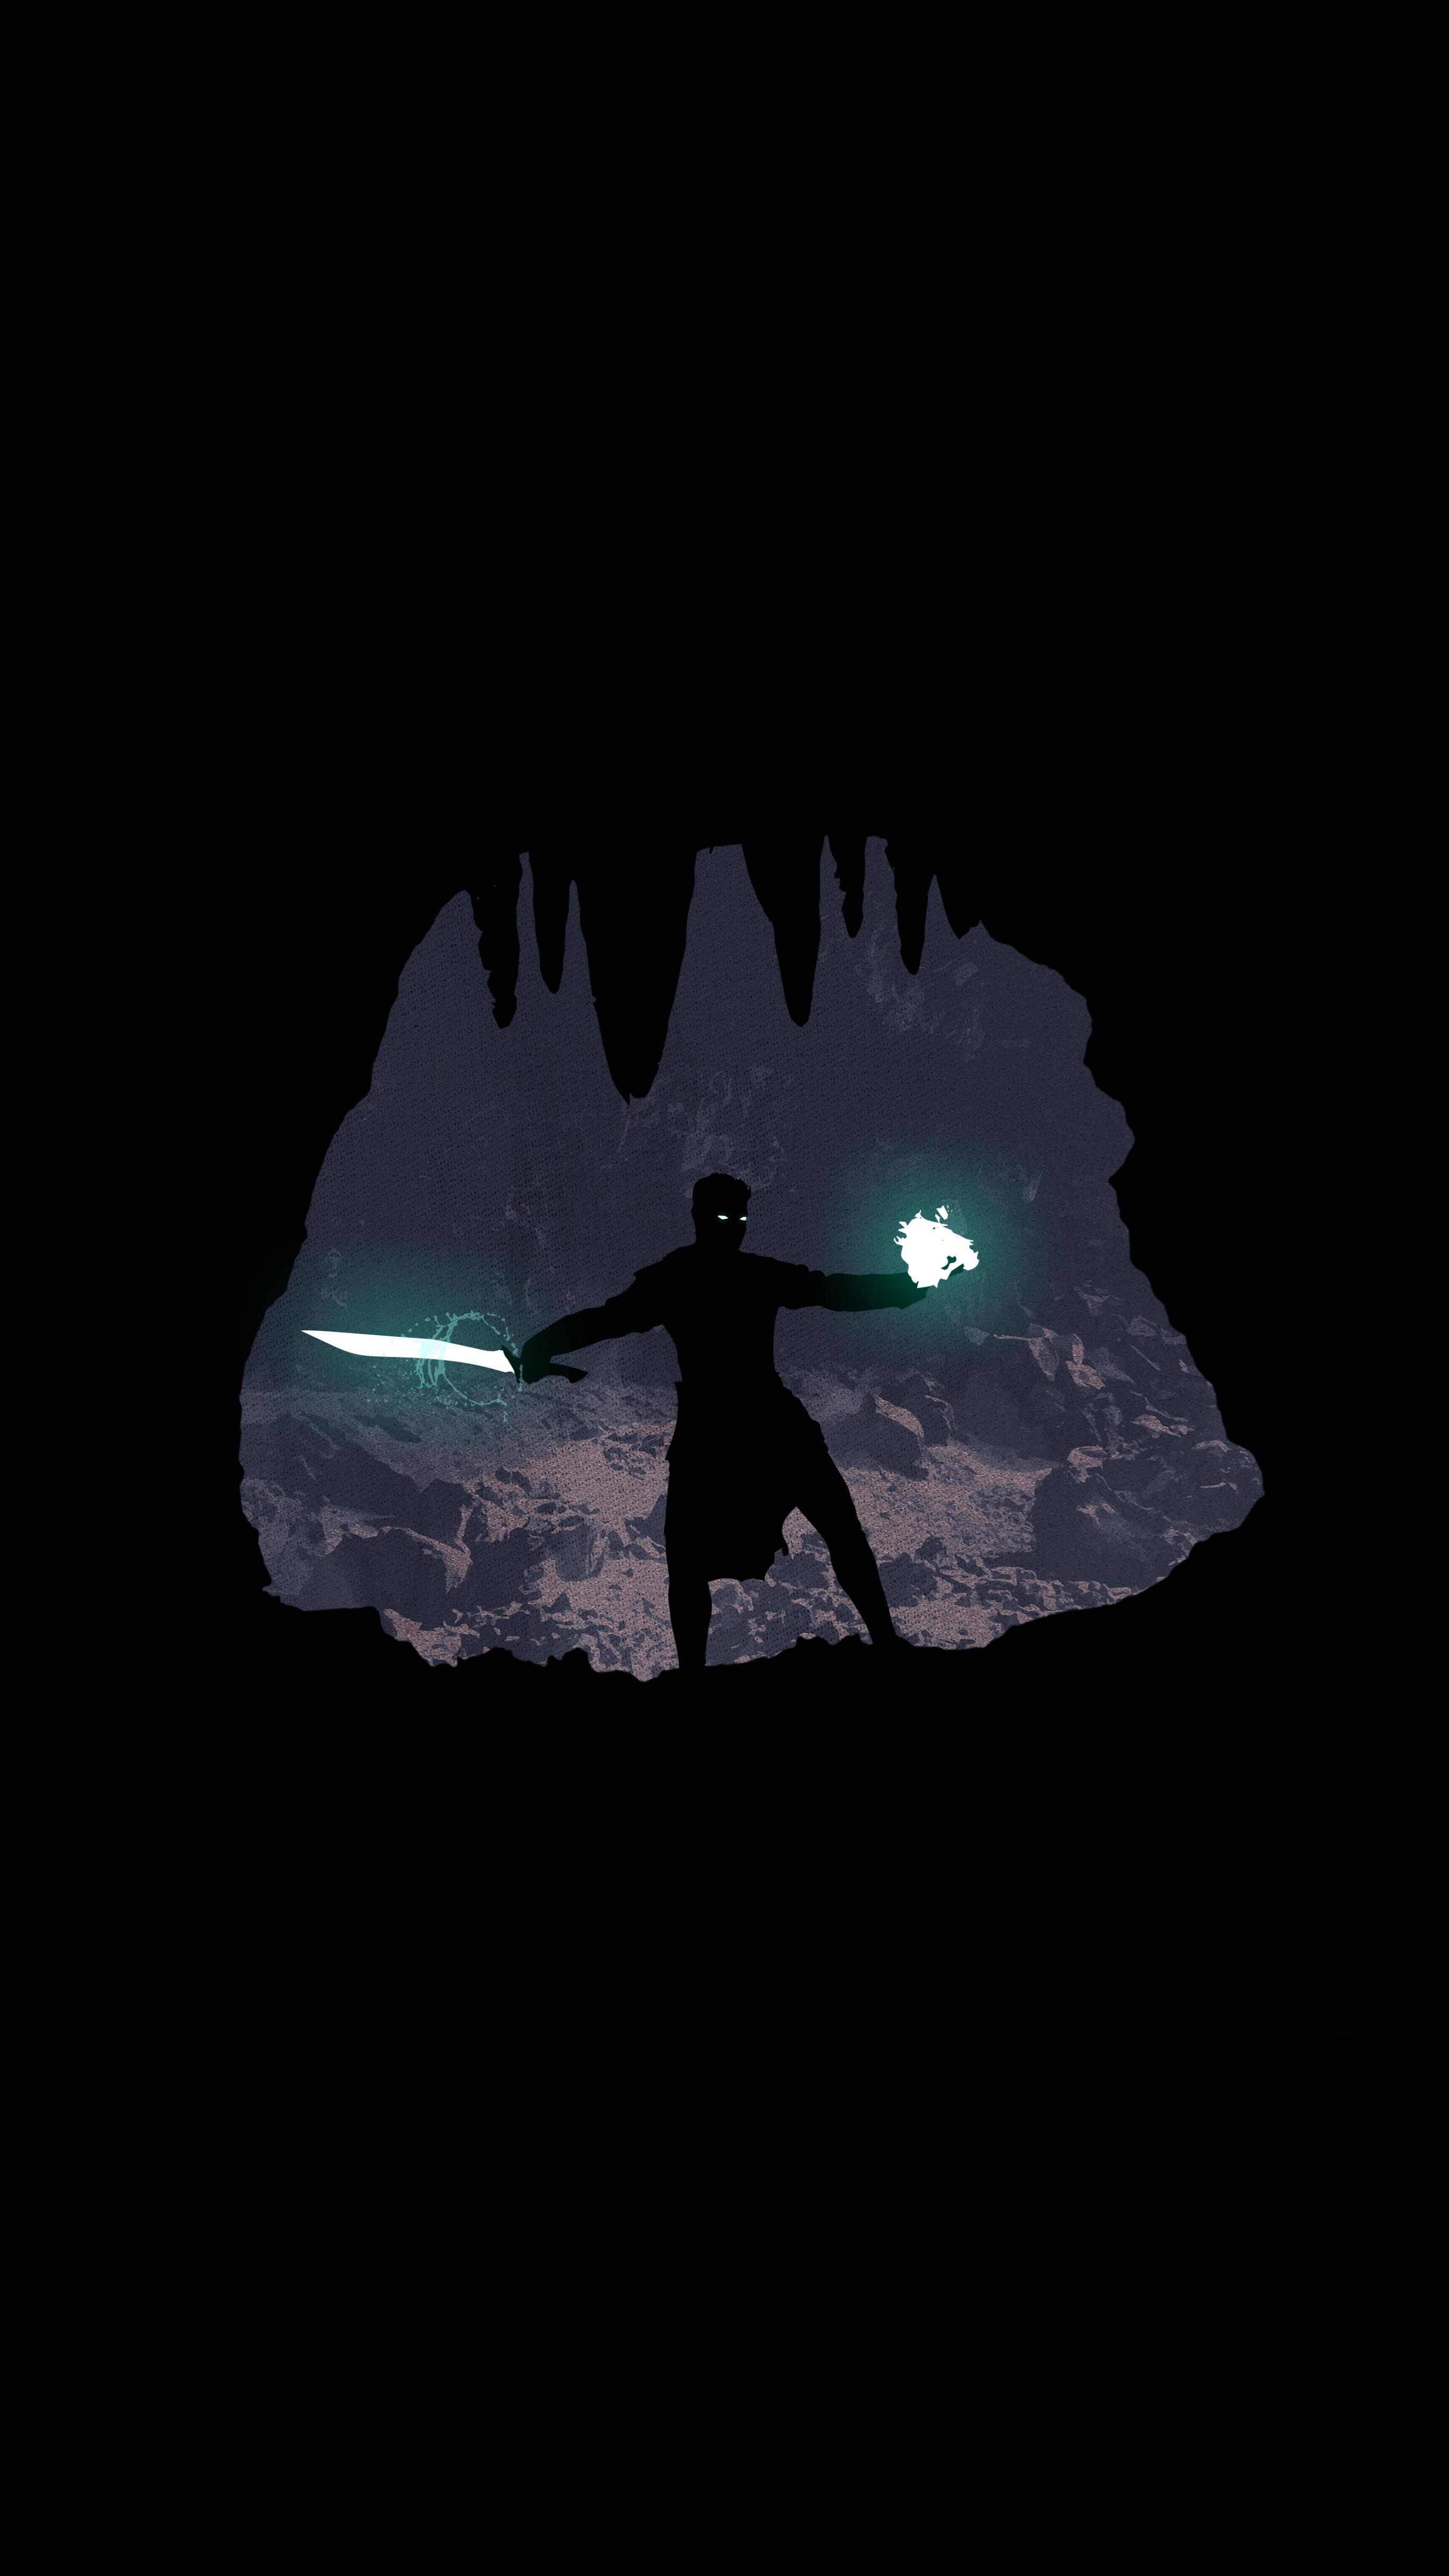 No Spoilers] Here's some Fjord artwork I did this week. Should be perfect for a phone background. Enjoy! [OC]